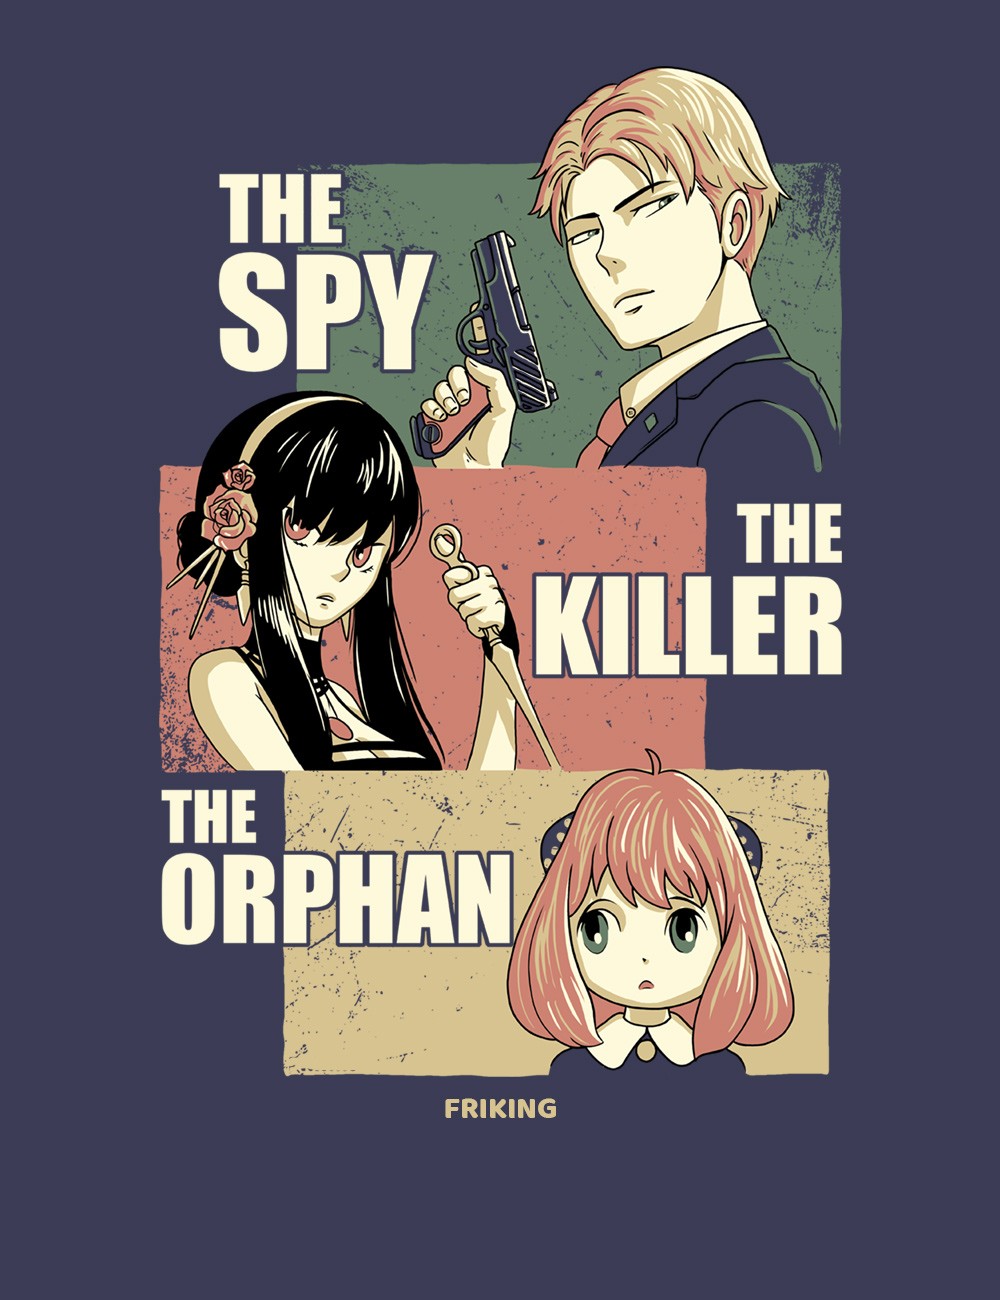 The spy, the killer and the orphan